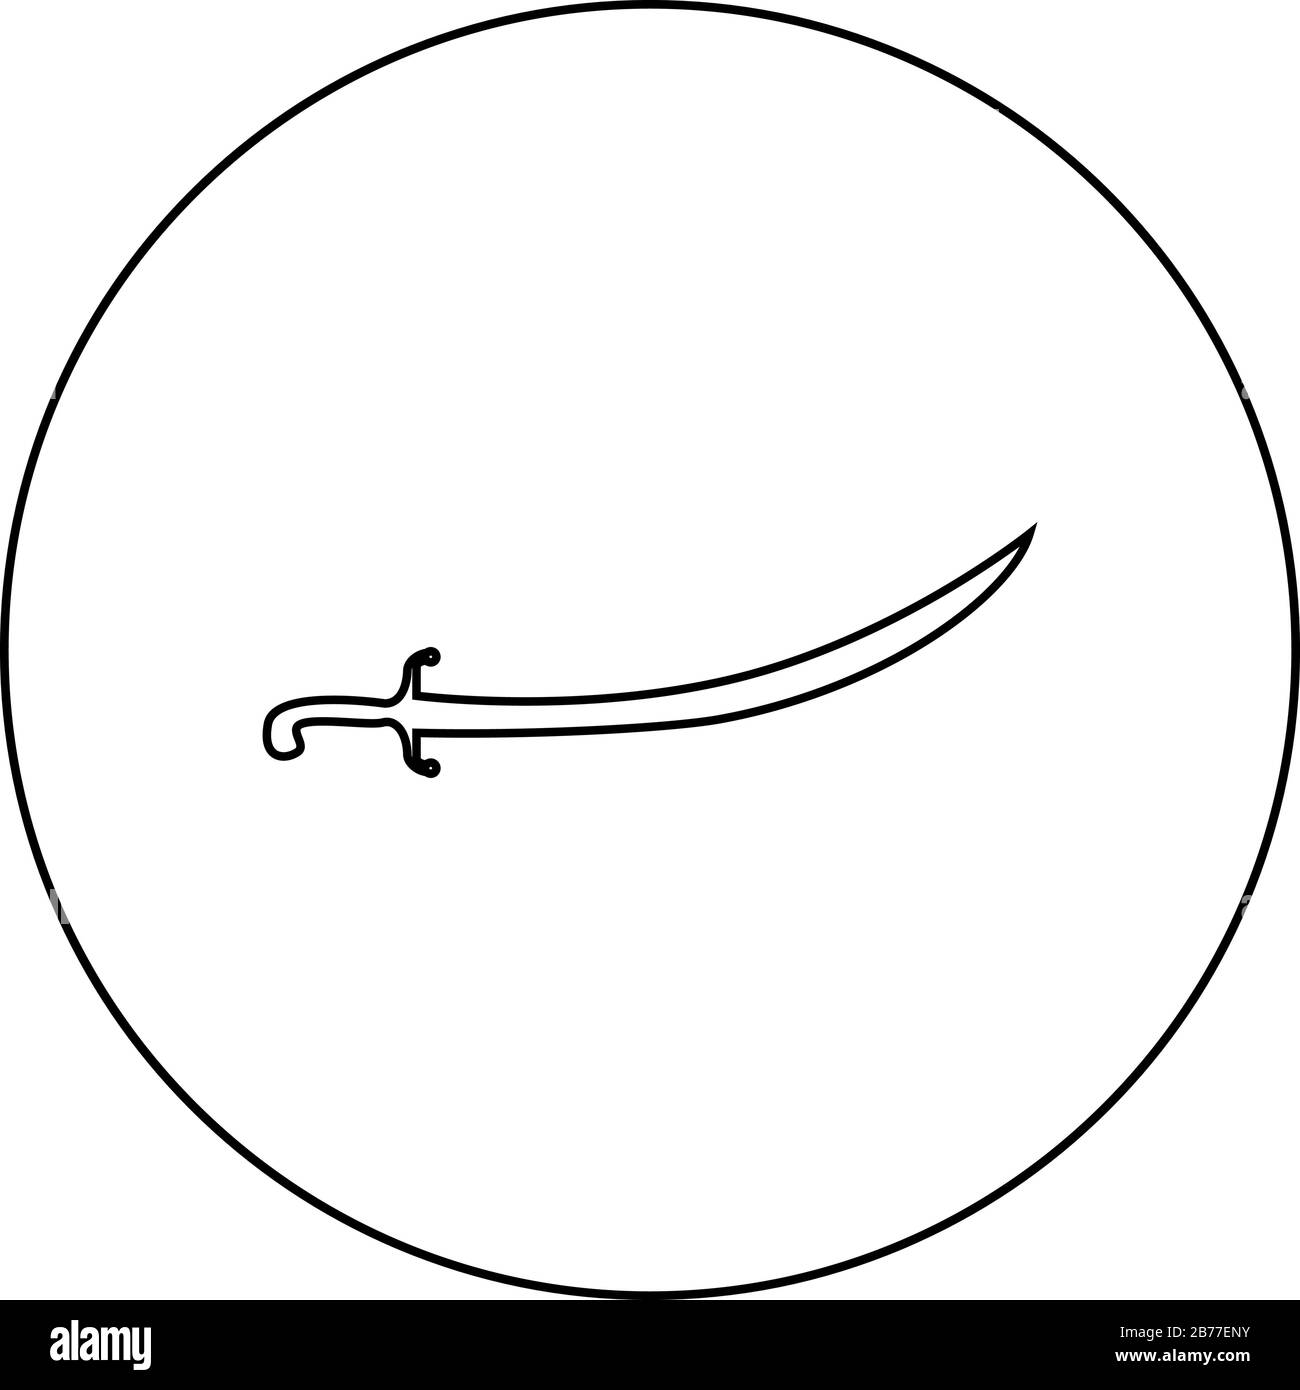 Turkish saber Scimitar Sabre of arabian persian Curved sword icon in circle round outline black color vector illustration flat style simple image Stock Vector